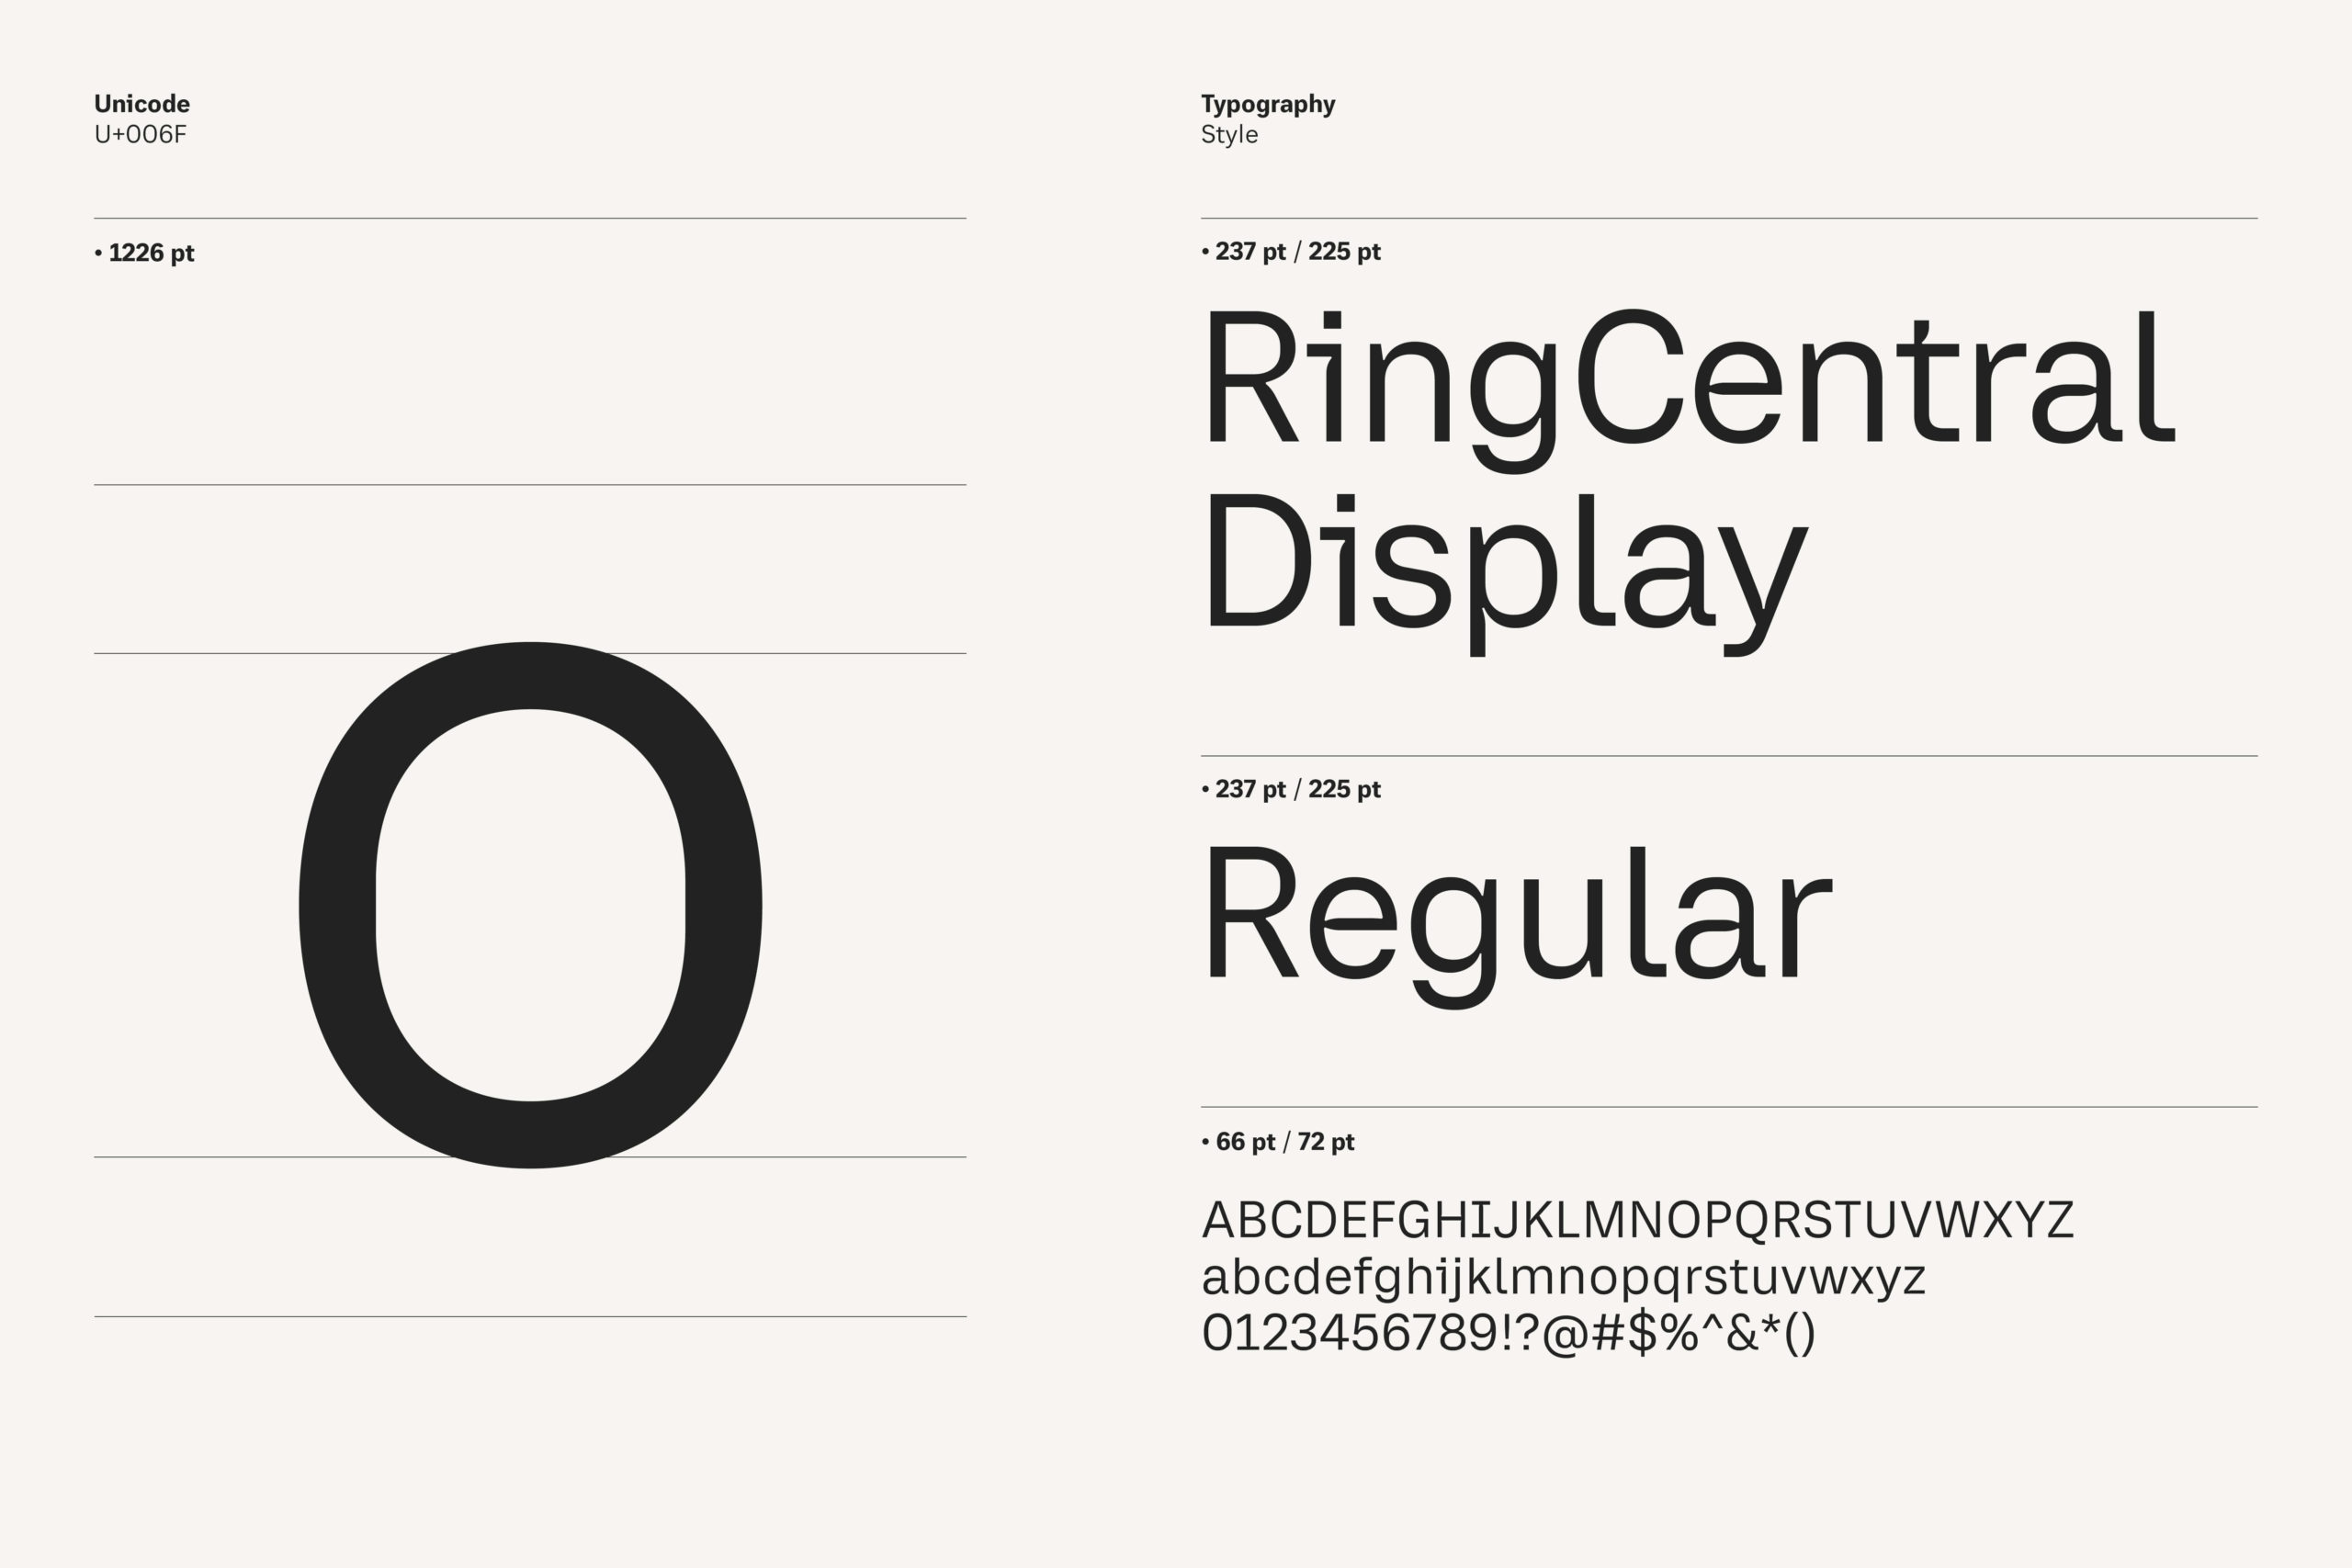 RingCentral Display_Typeface_09142212